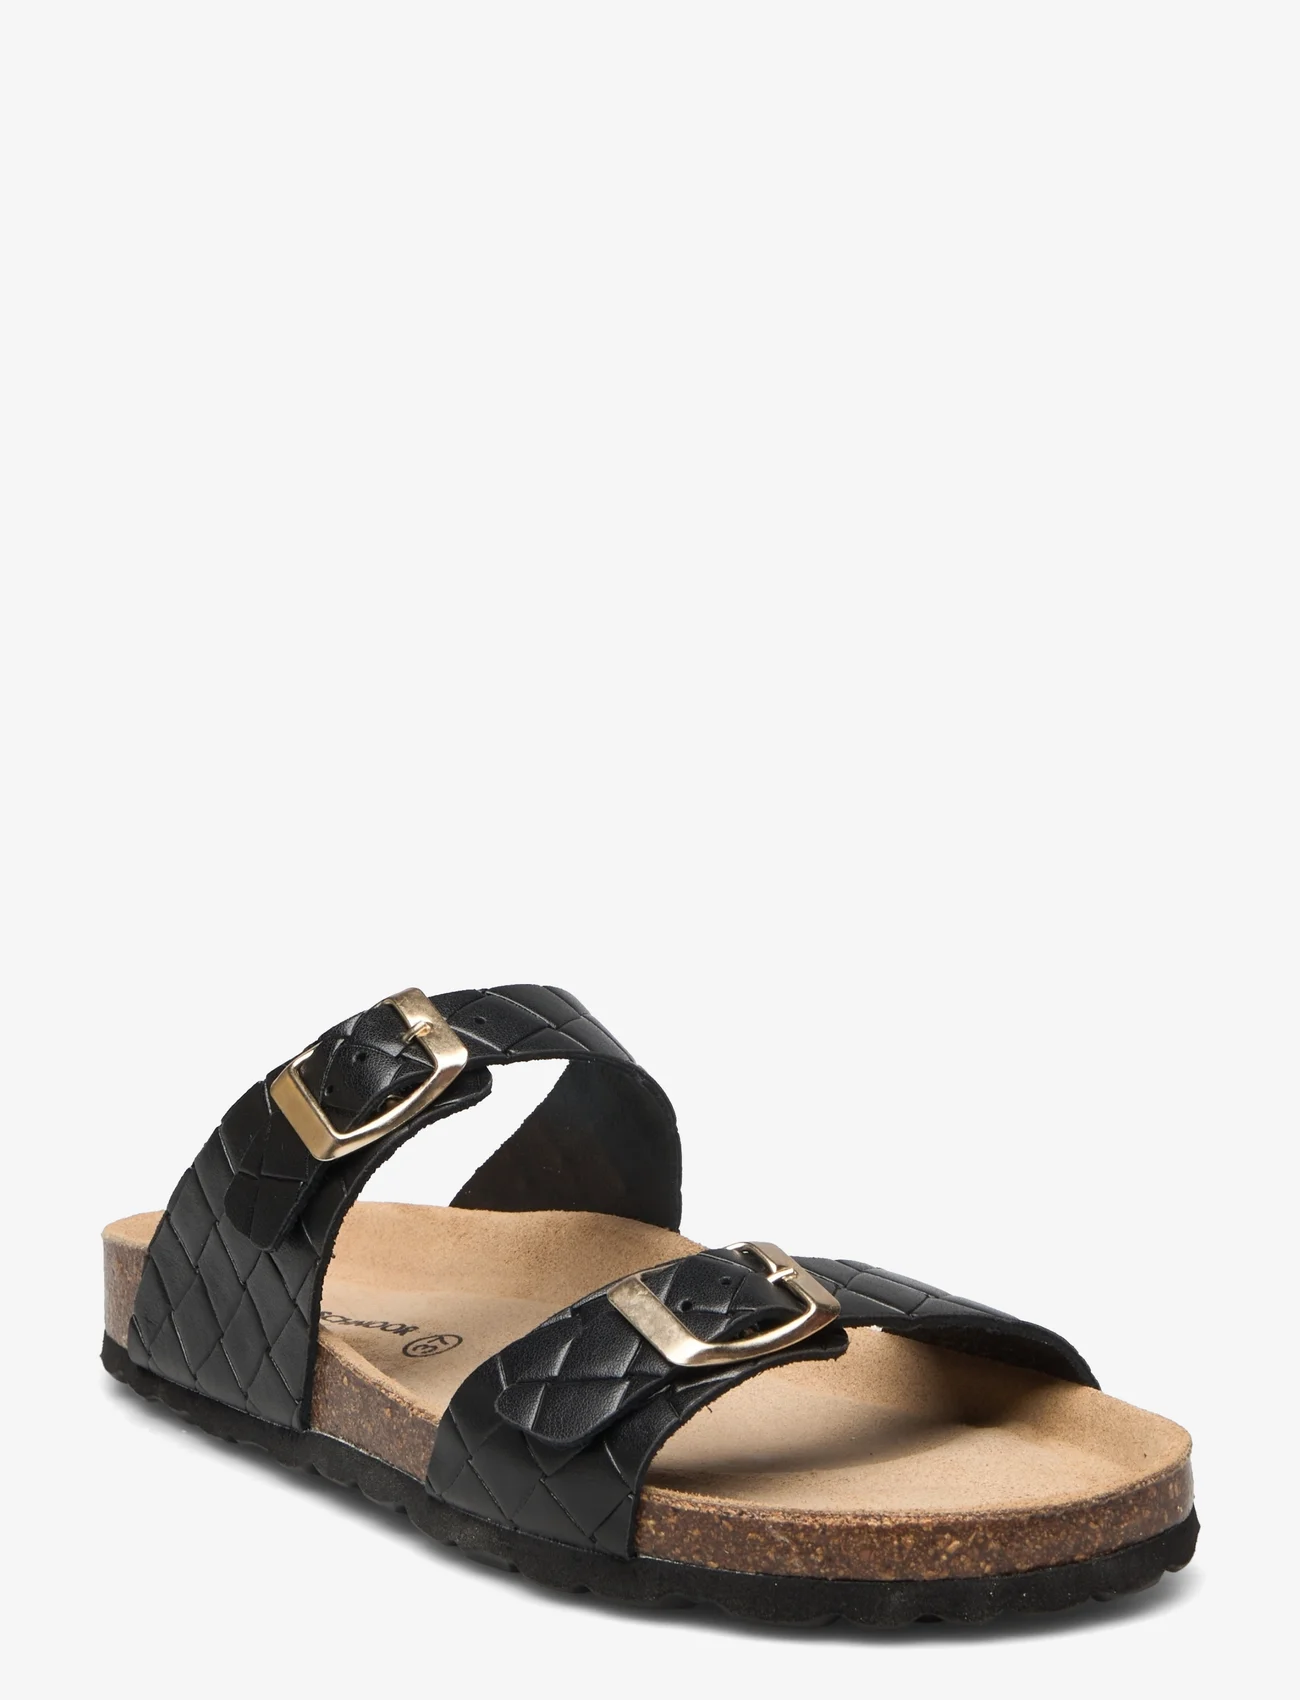 Sofie Schnoor Baby and Kids - Sandal - sommarfynd - black - 0